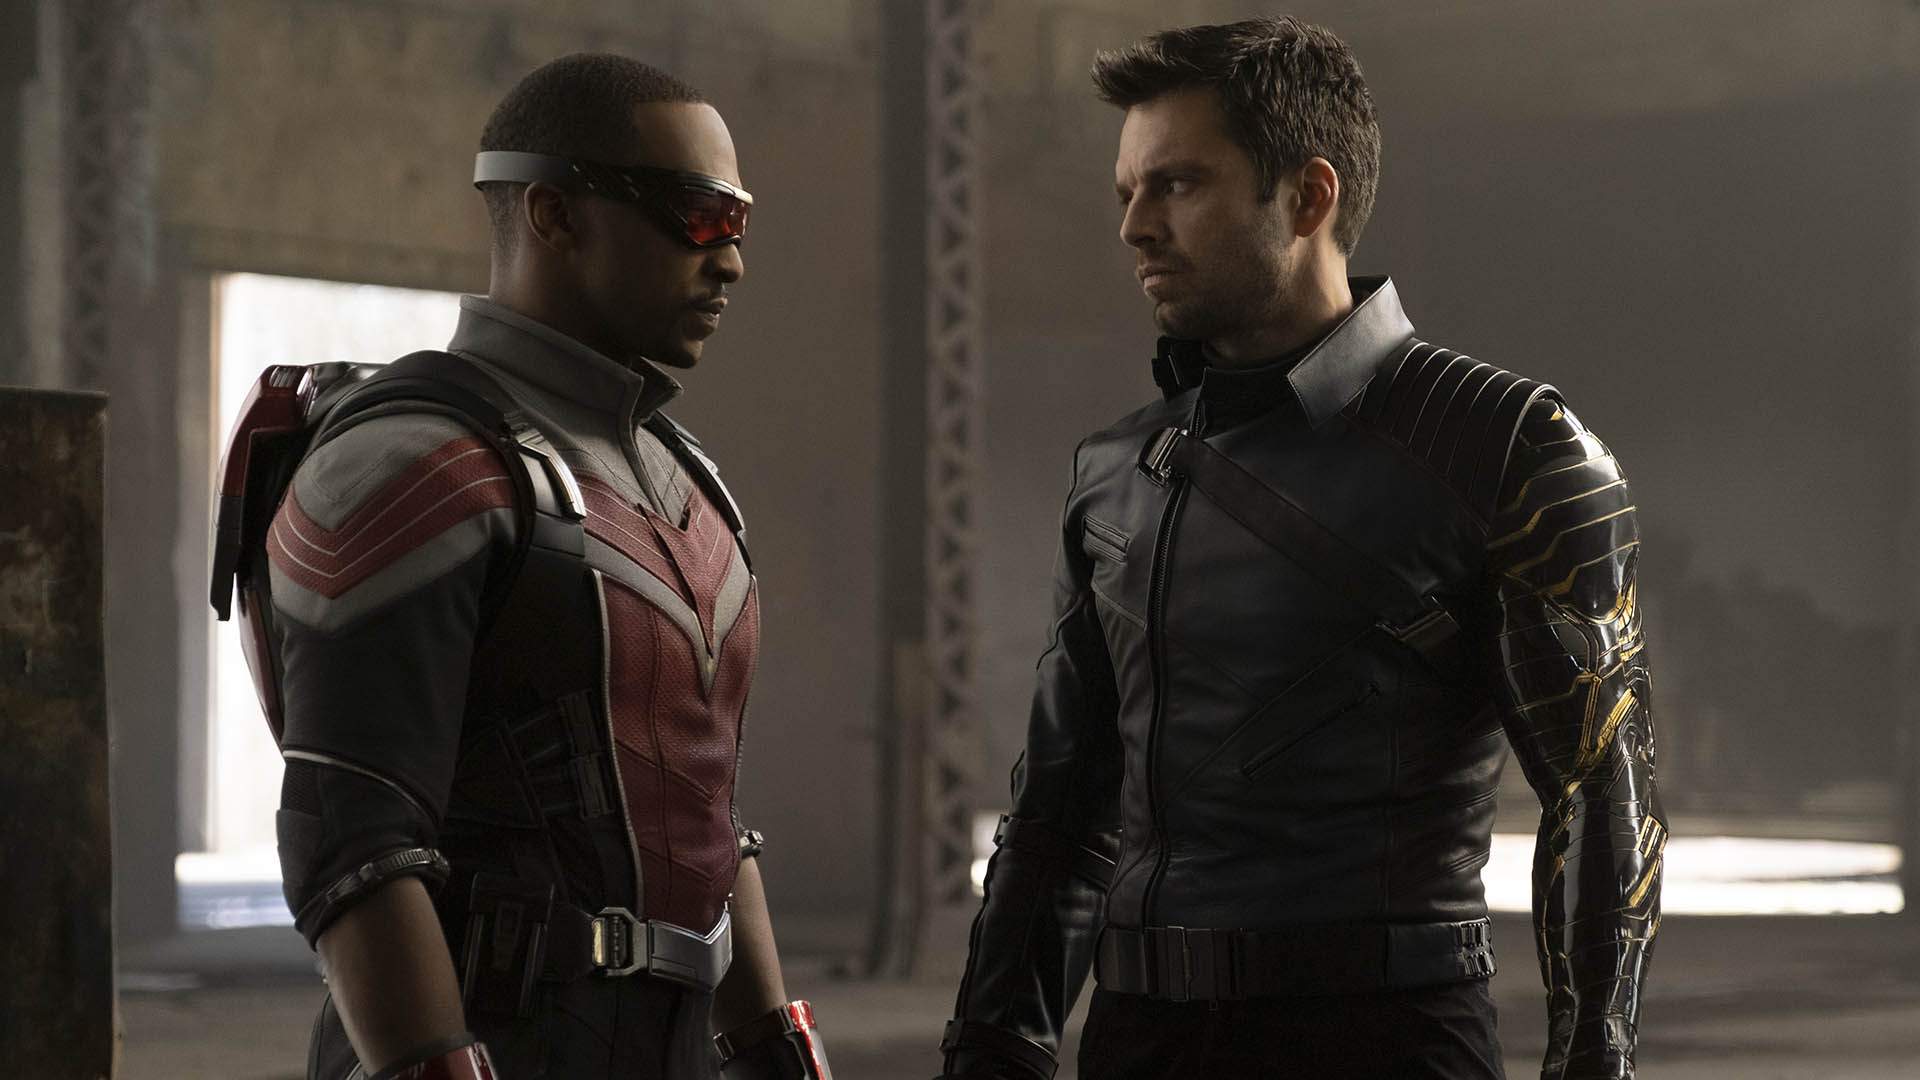 Disney+ Has Just Dropped the Full Trailer for Its New 'Falcon and the Winter Soldier' Series